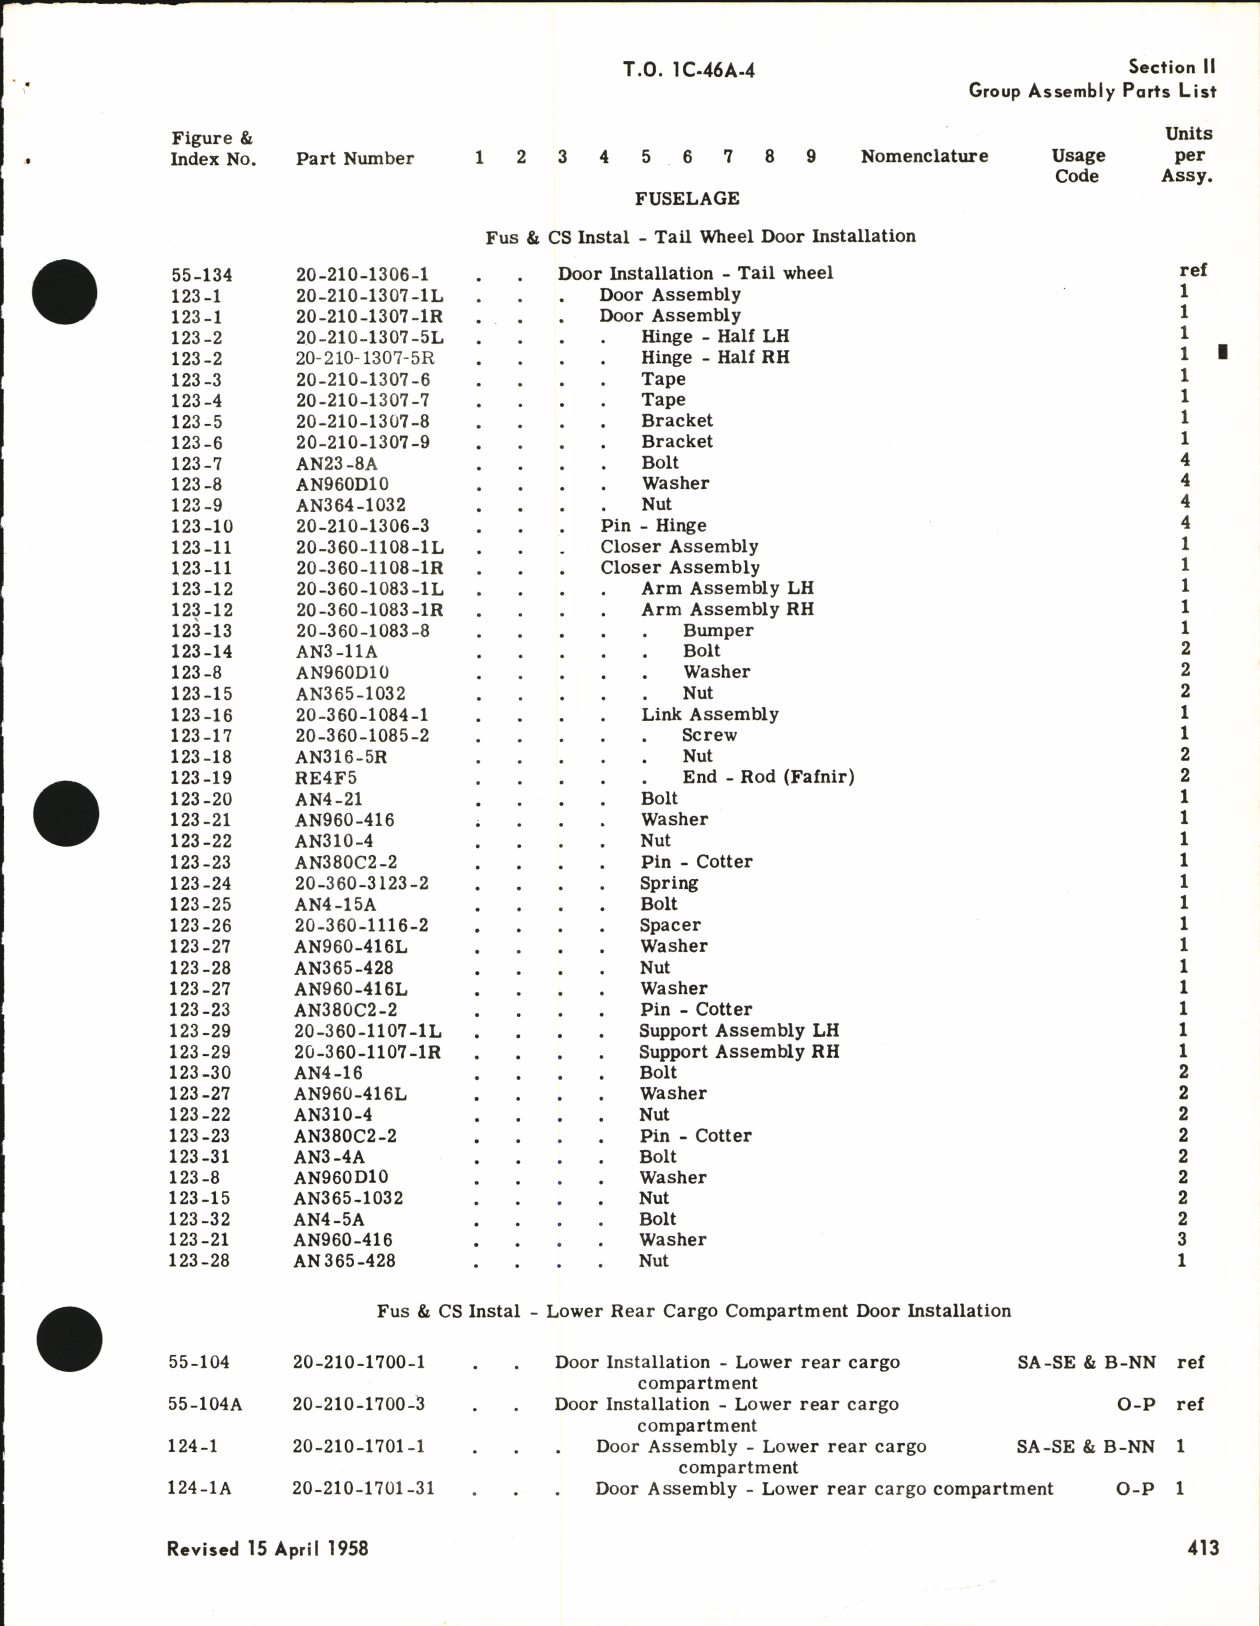 Sample page 5 from AirCorps Library document: Illustrated Parts Breakdown for C-46A, C-46D, and R5C-1